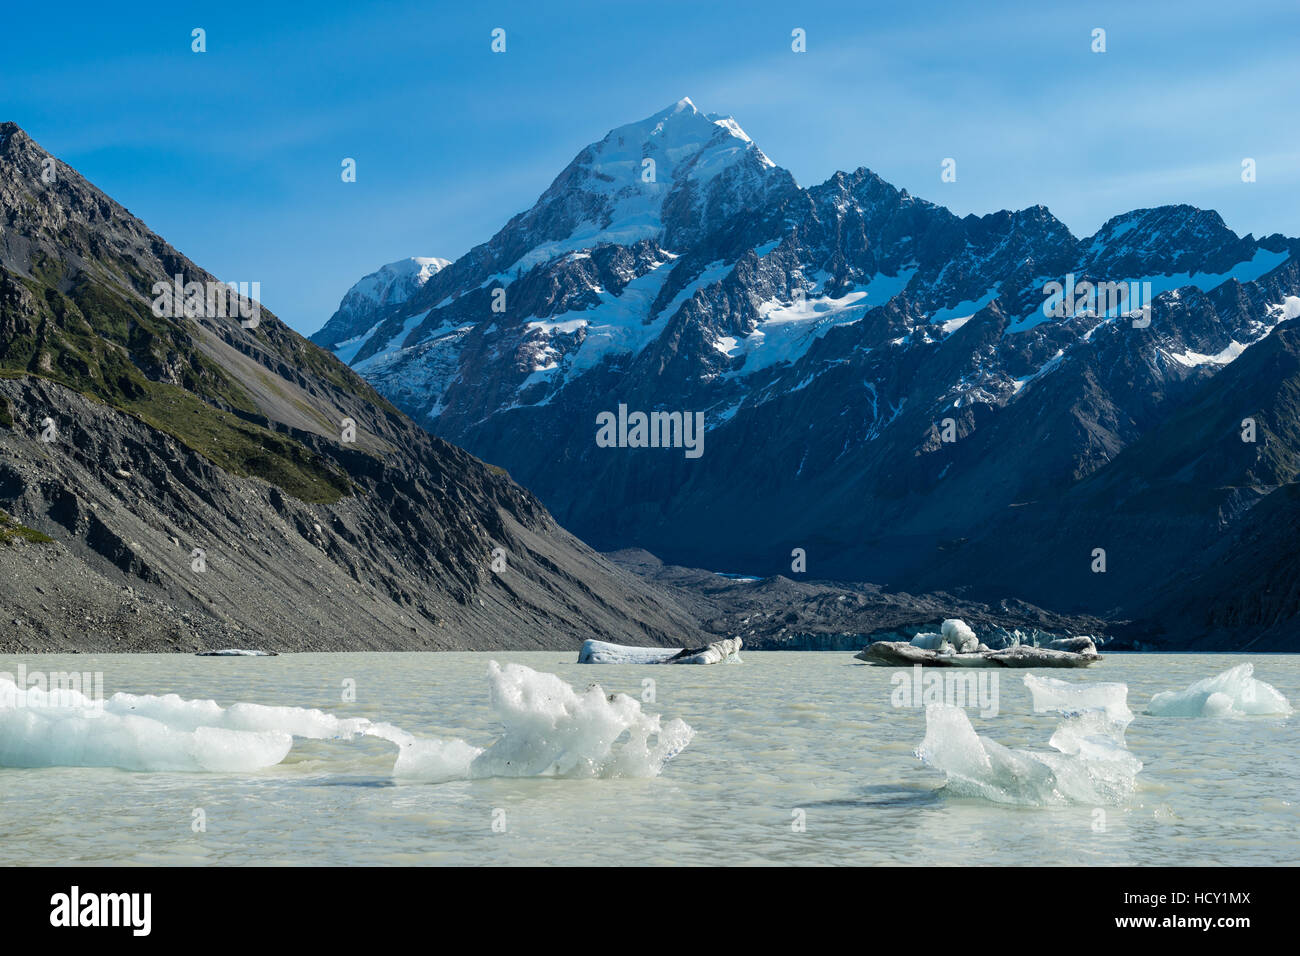 Icebergs float in a cold lake with a large snow covered mountain, South Island, New Zealand Stock Photo